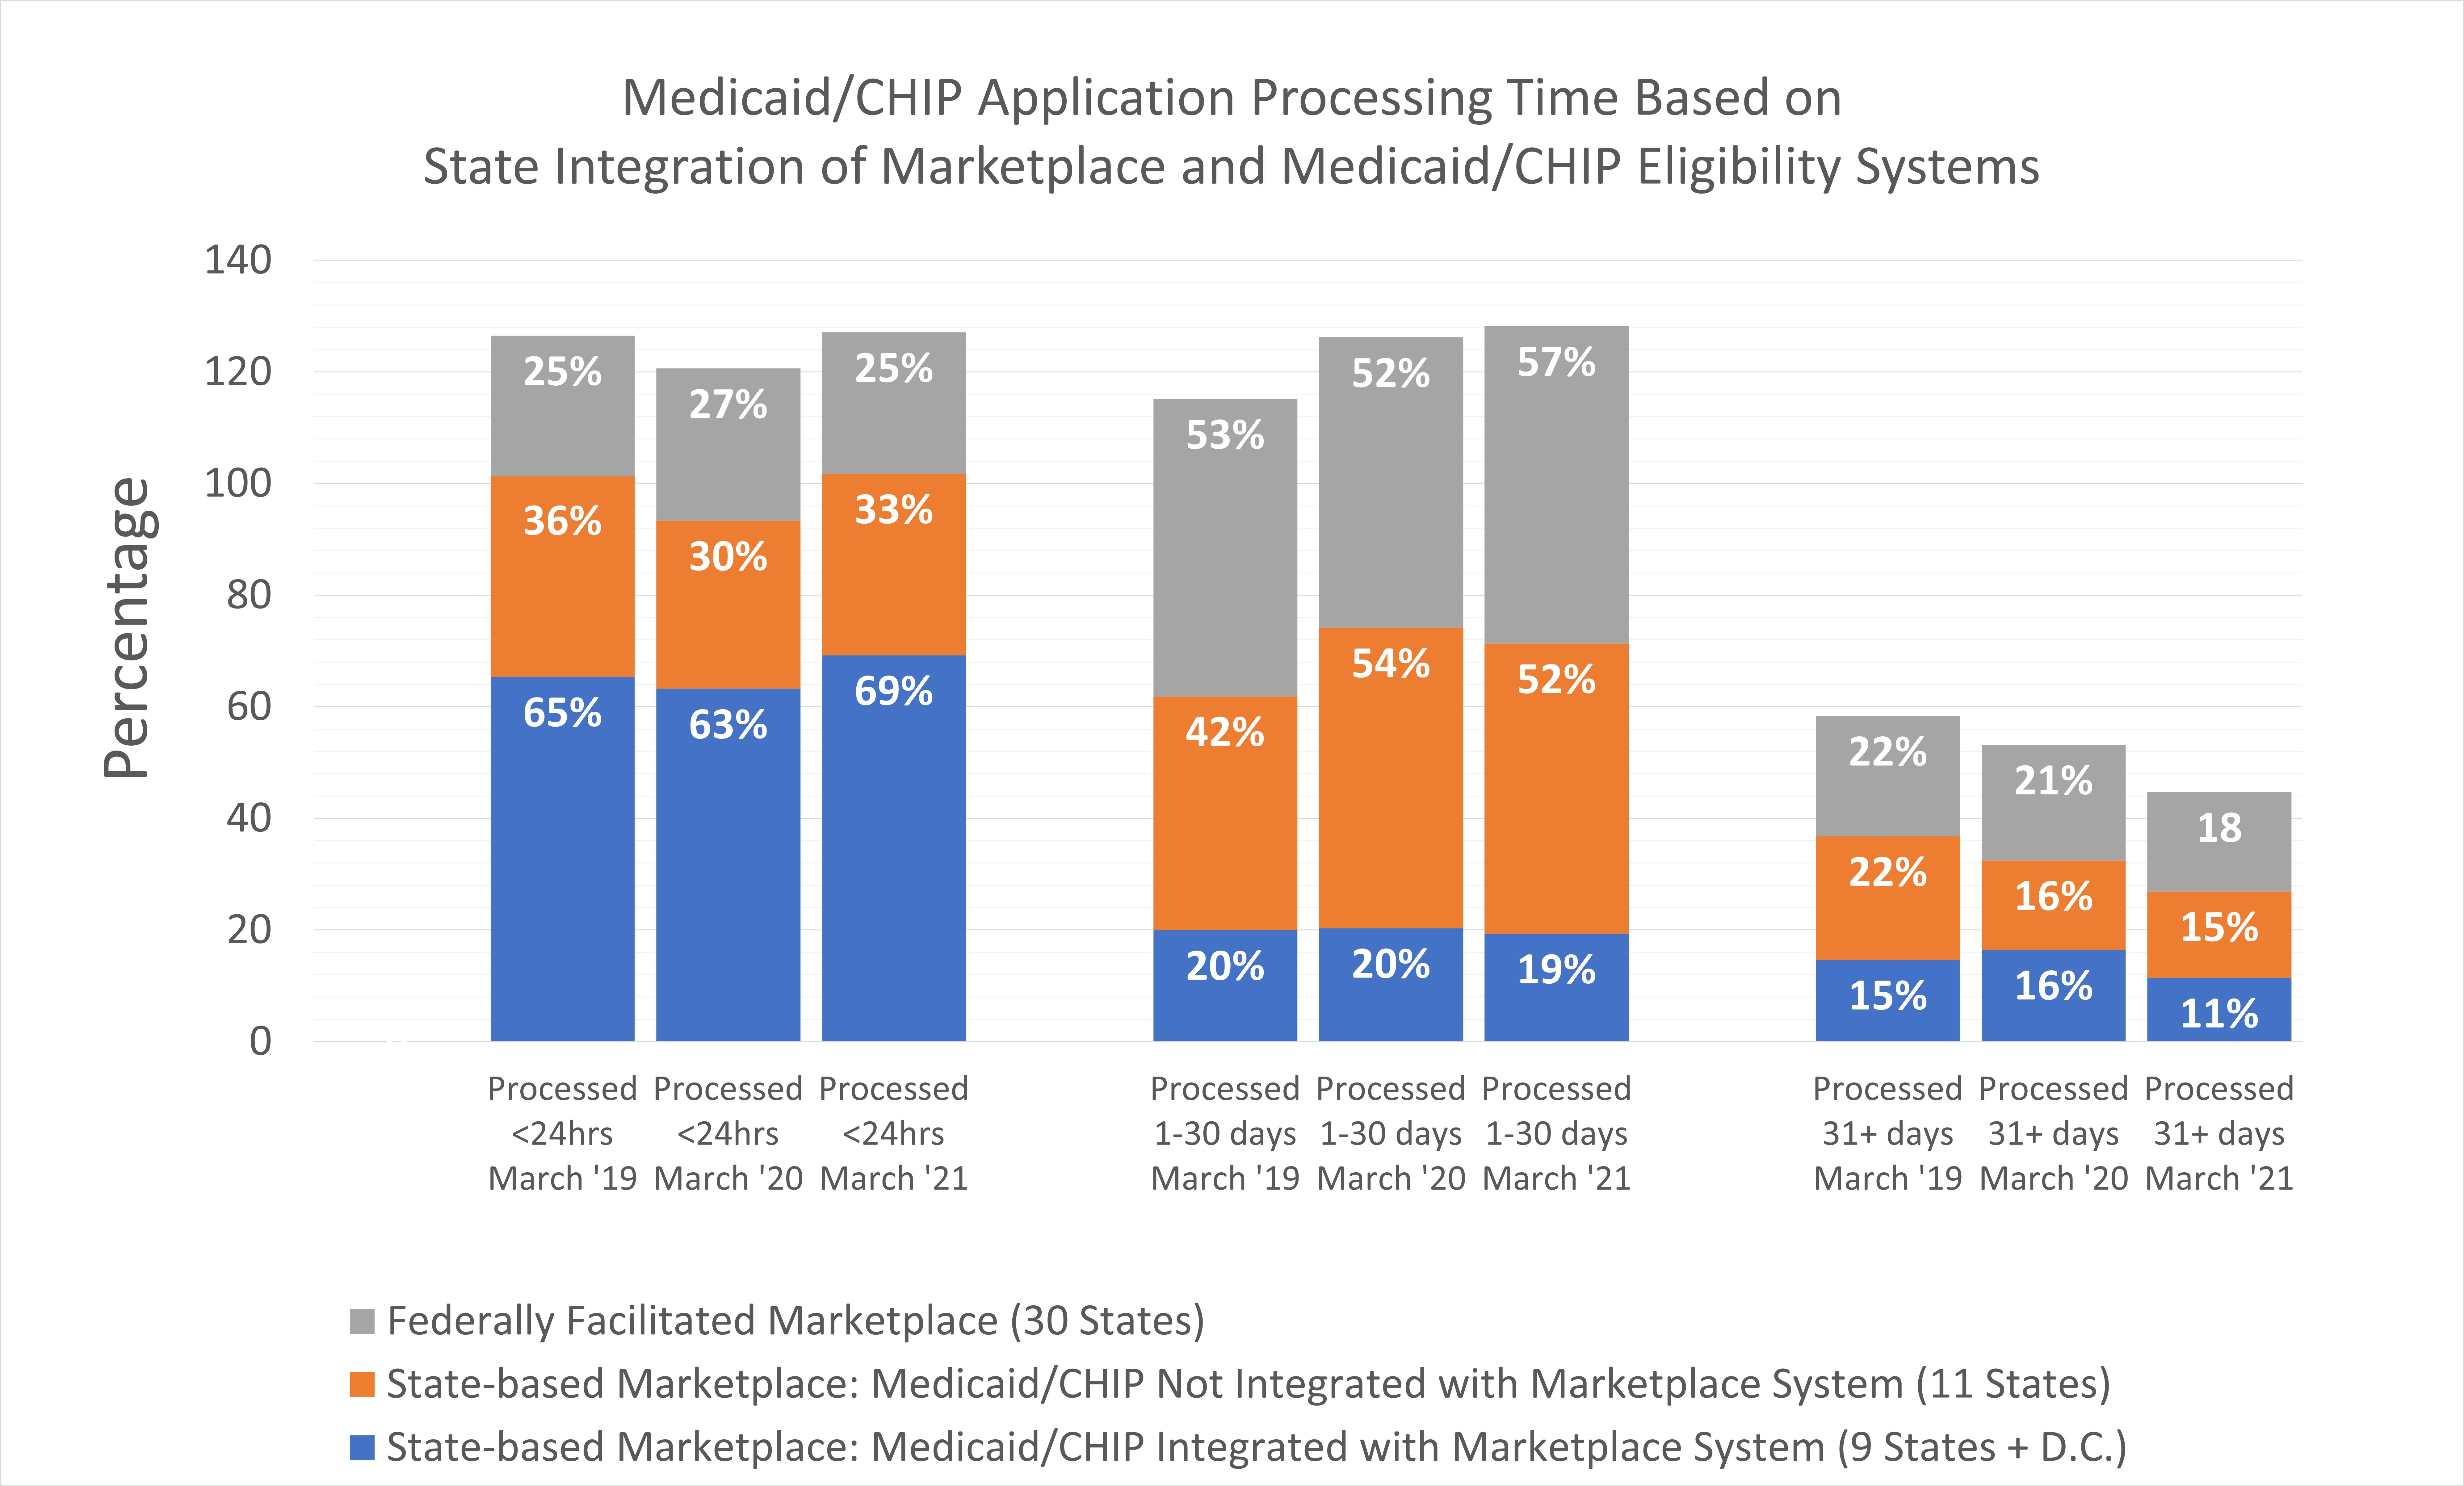 Comparison of Medicaid/CHIP Application Processing Time Based on State Integration of Marketplace and Medicaid/CHIP Eligibility Systems